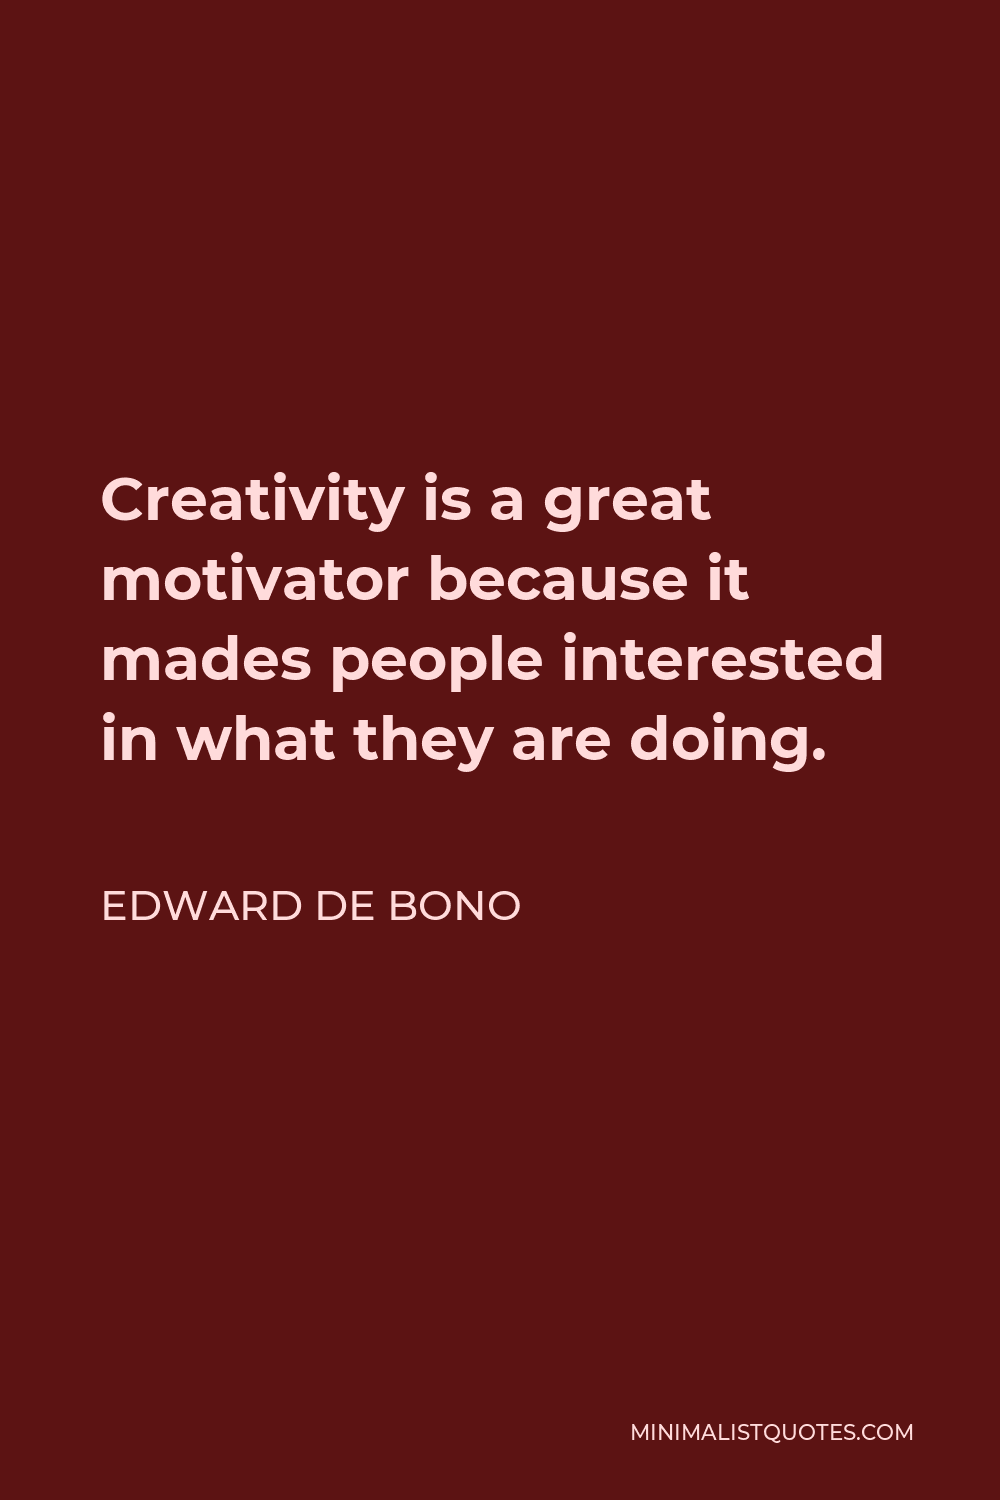 Edward de Bono Quote - Creativity is a great motivator because it mades people interested in what they are doing.